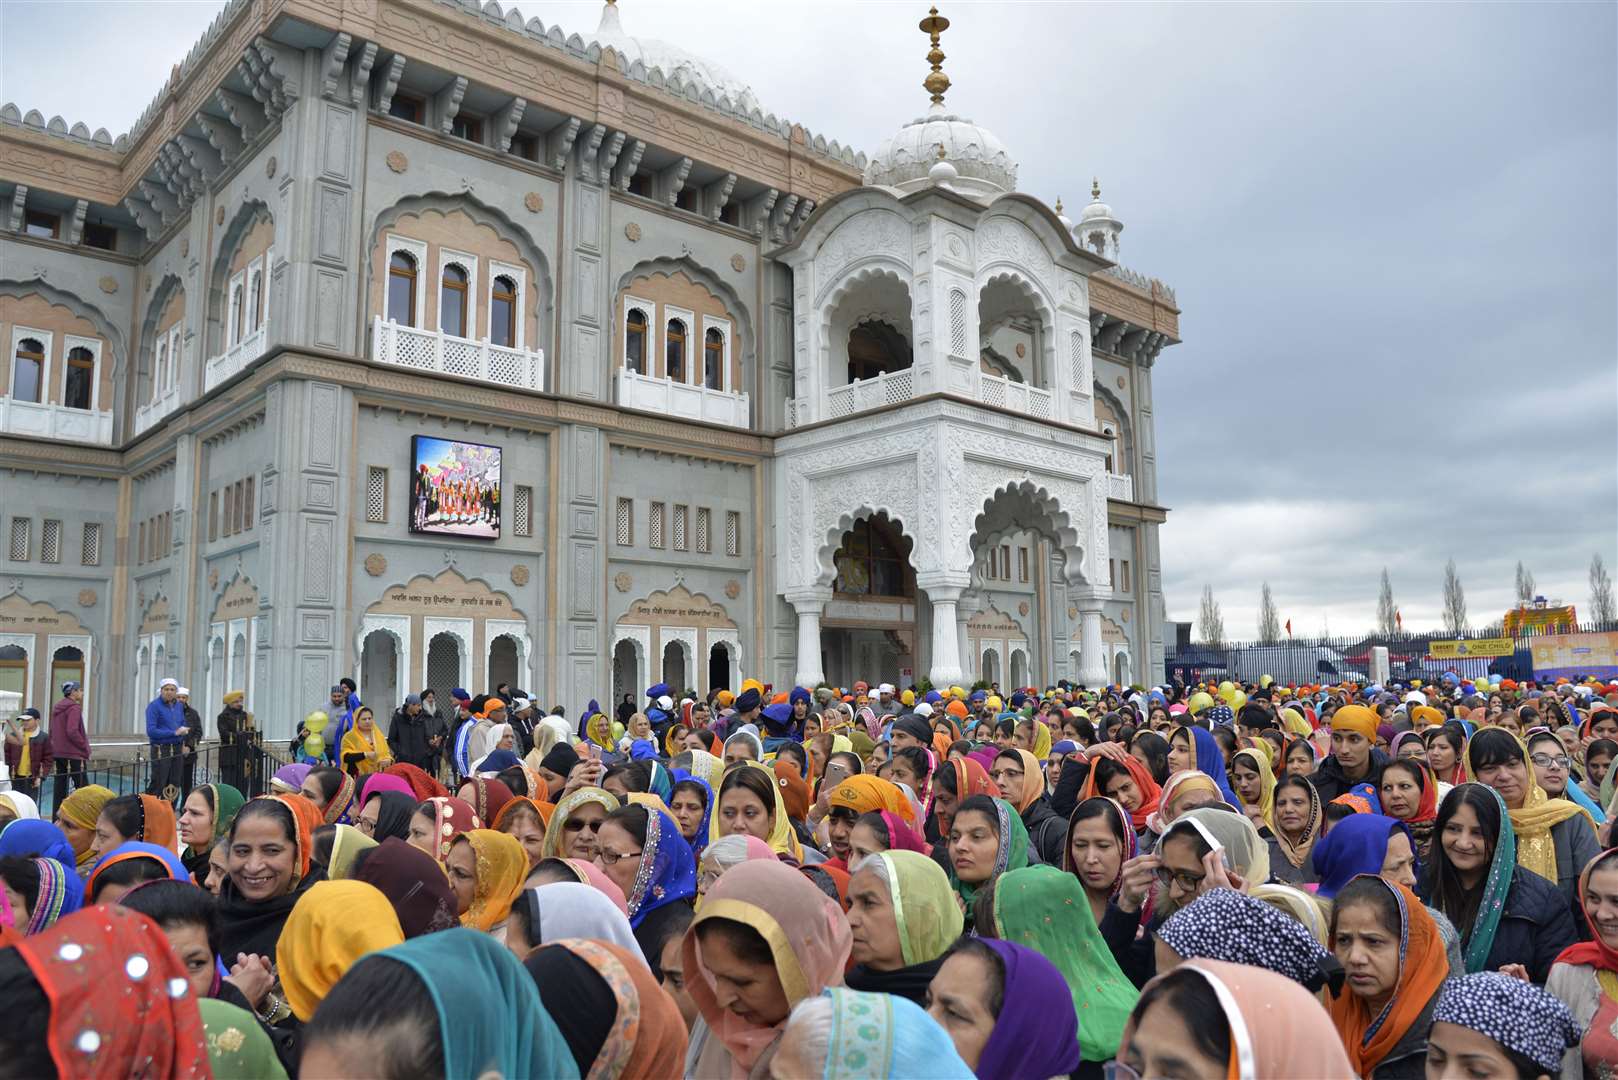 The gurdwara is a celebrated landmark in Gravesend, visited by all faiths